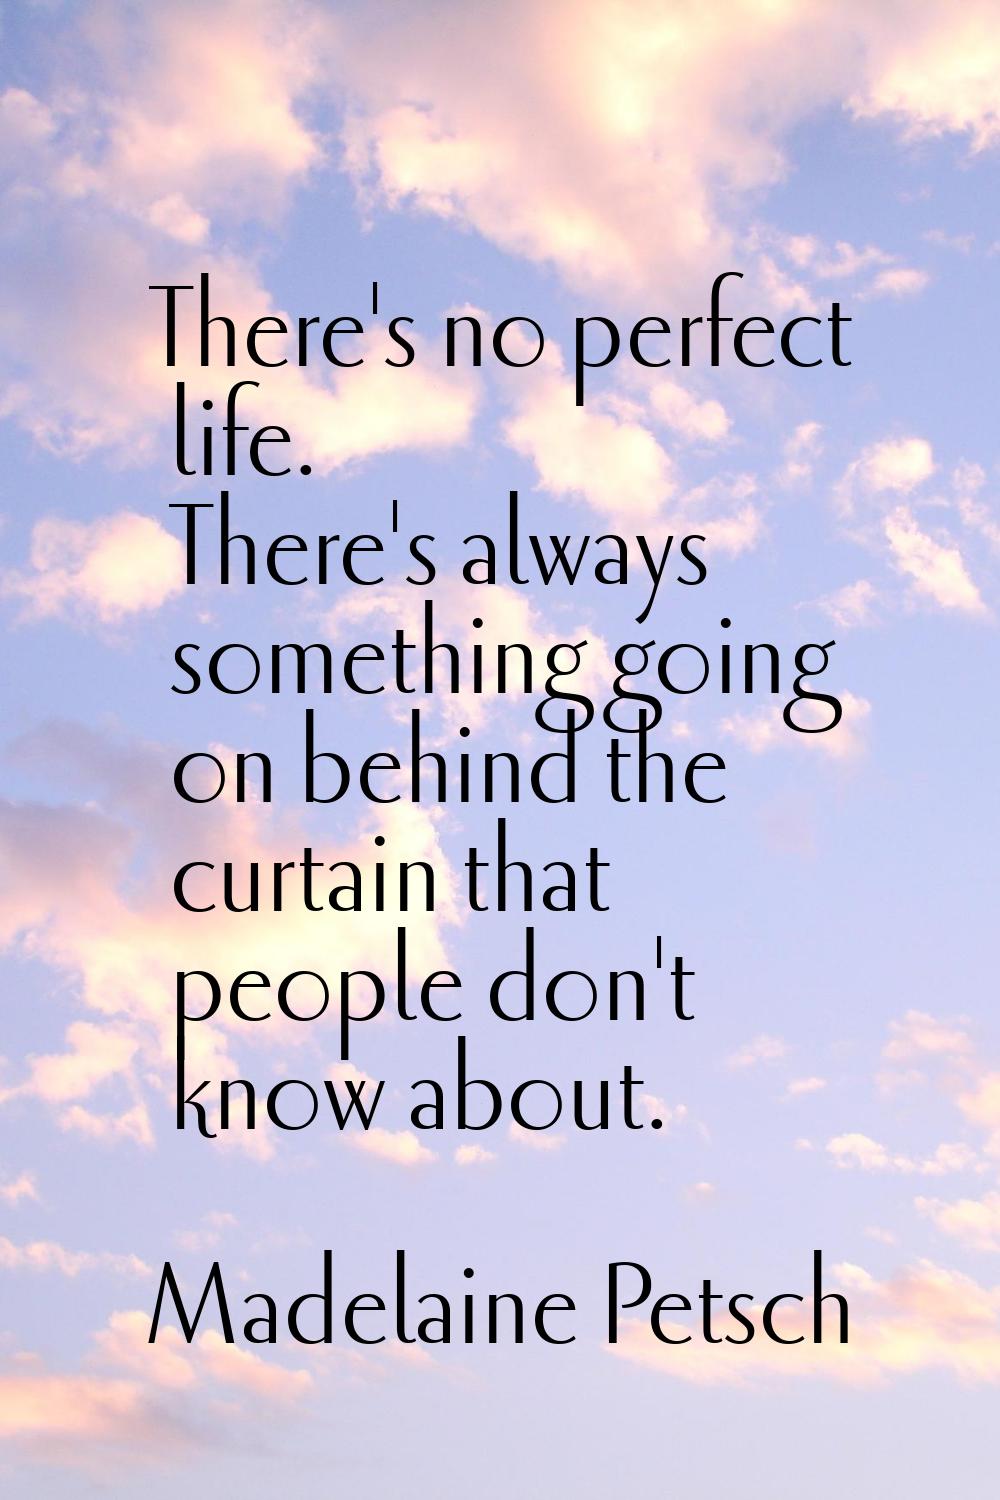 There's no perfect life. There's always something going on behind the curtain that people don't kno